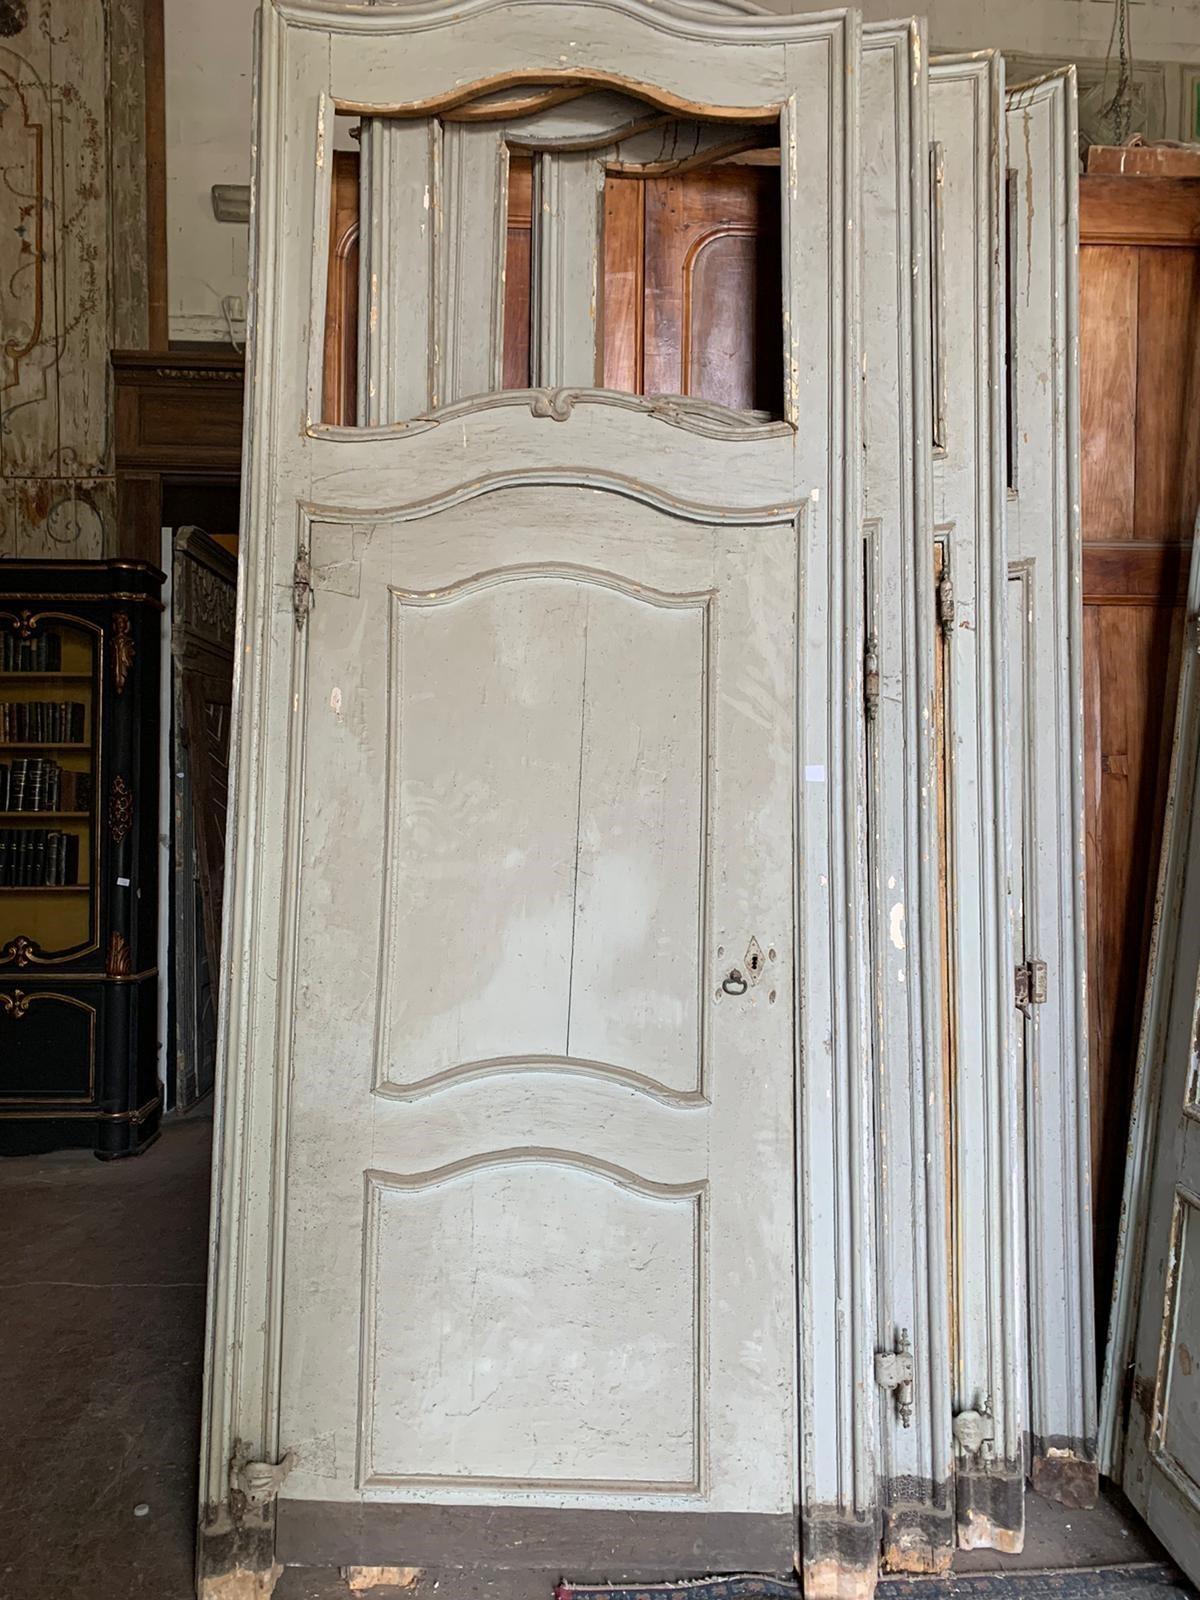 Incredible set of No. 8 antique interior doors, with frame and overdoor, are 4 with moved bar and 4 with straight bar, but coming from the same large noble residence in Piedmont (Italy). Hand-built in the 18th century, they have original gooseneck